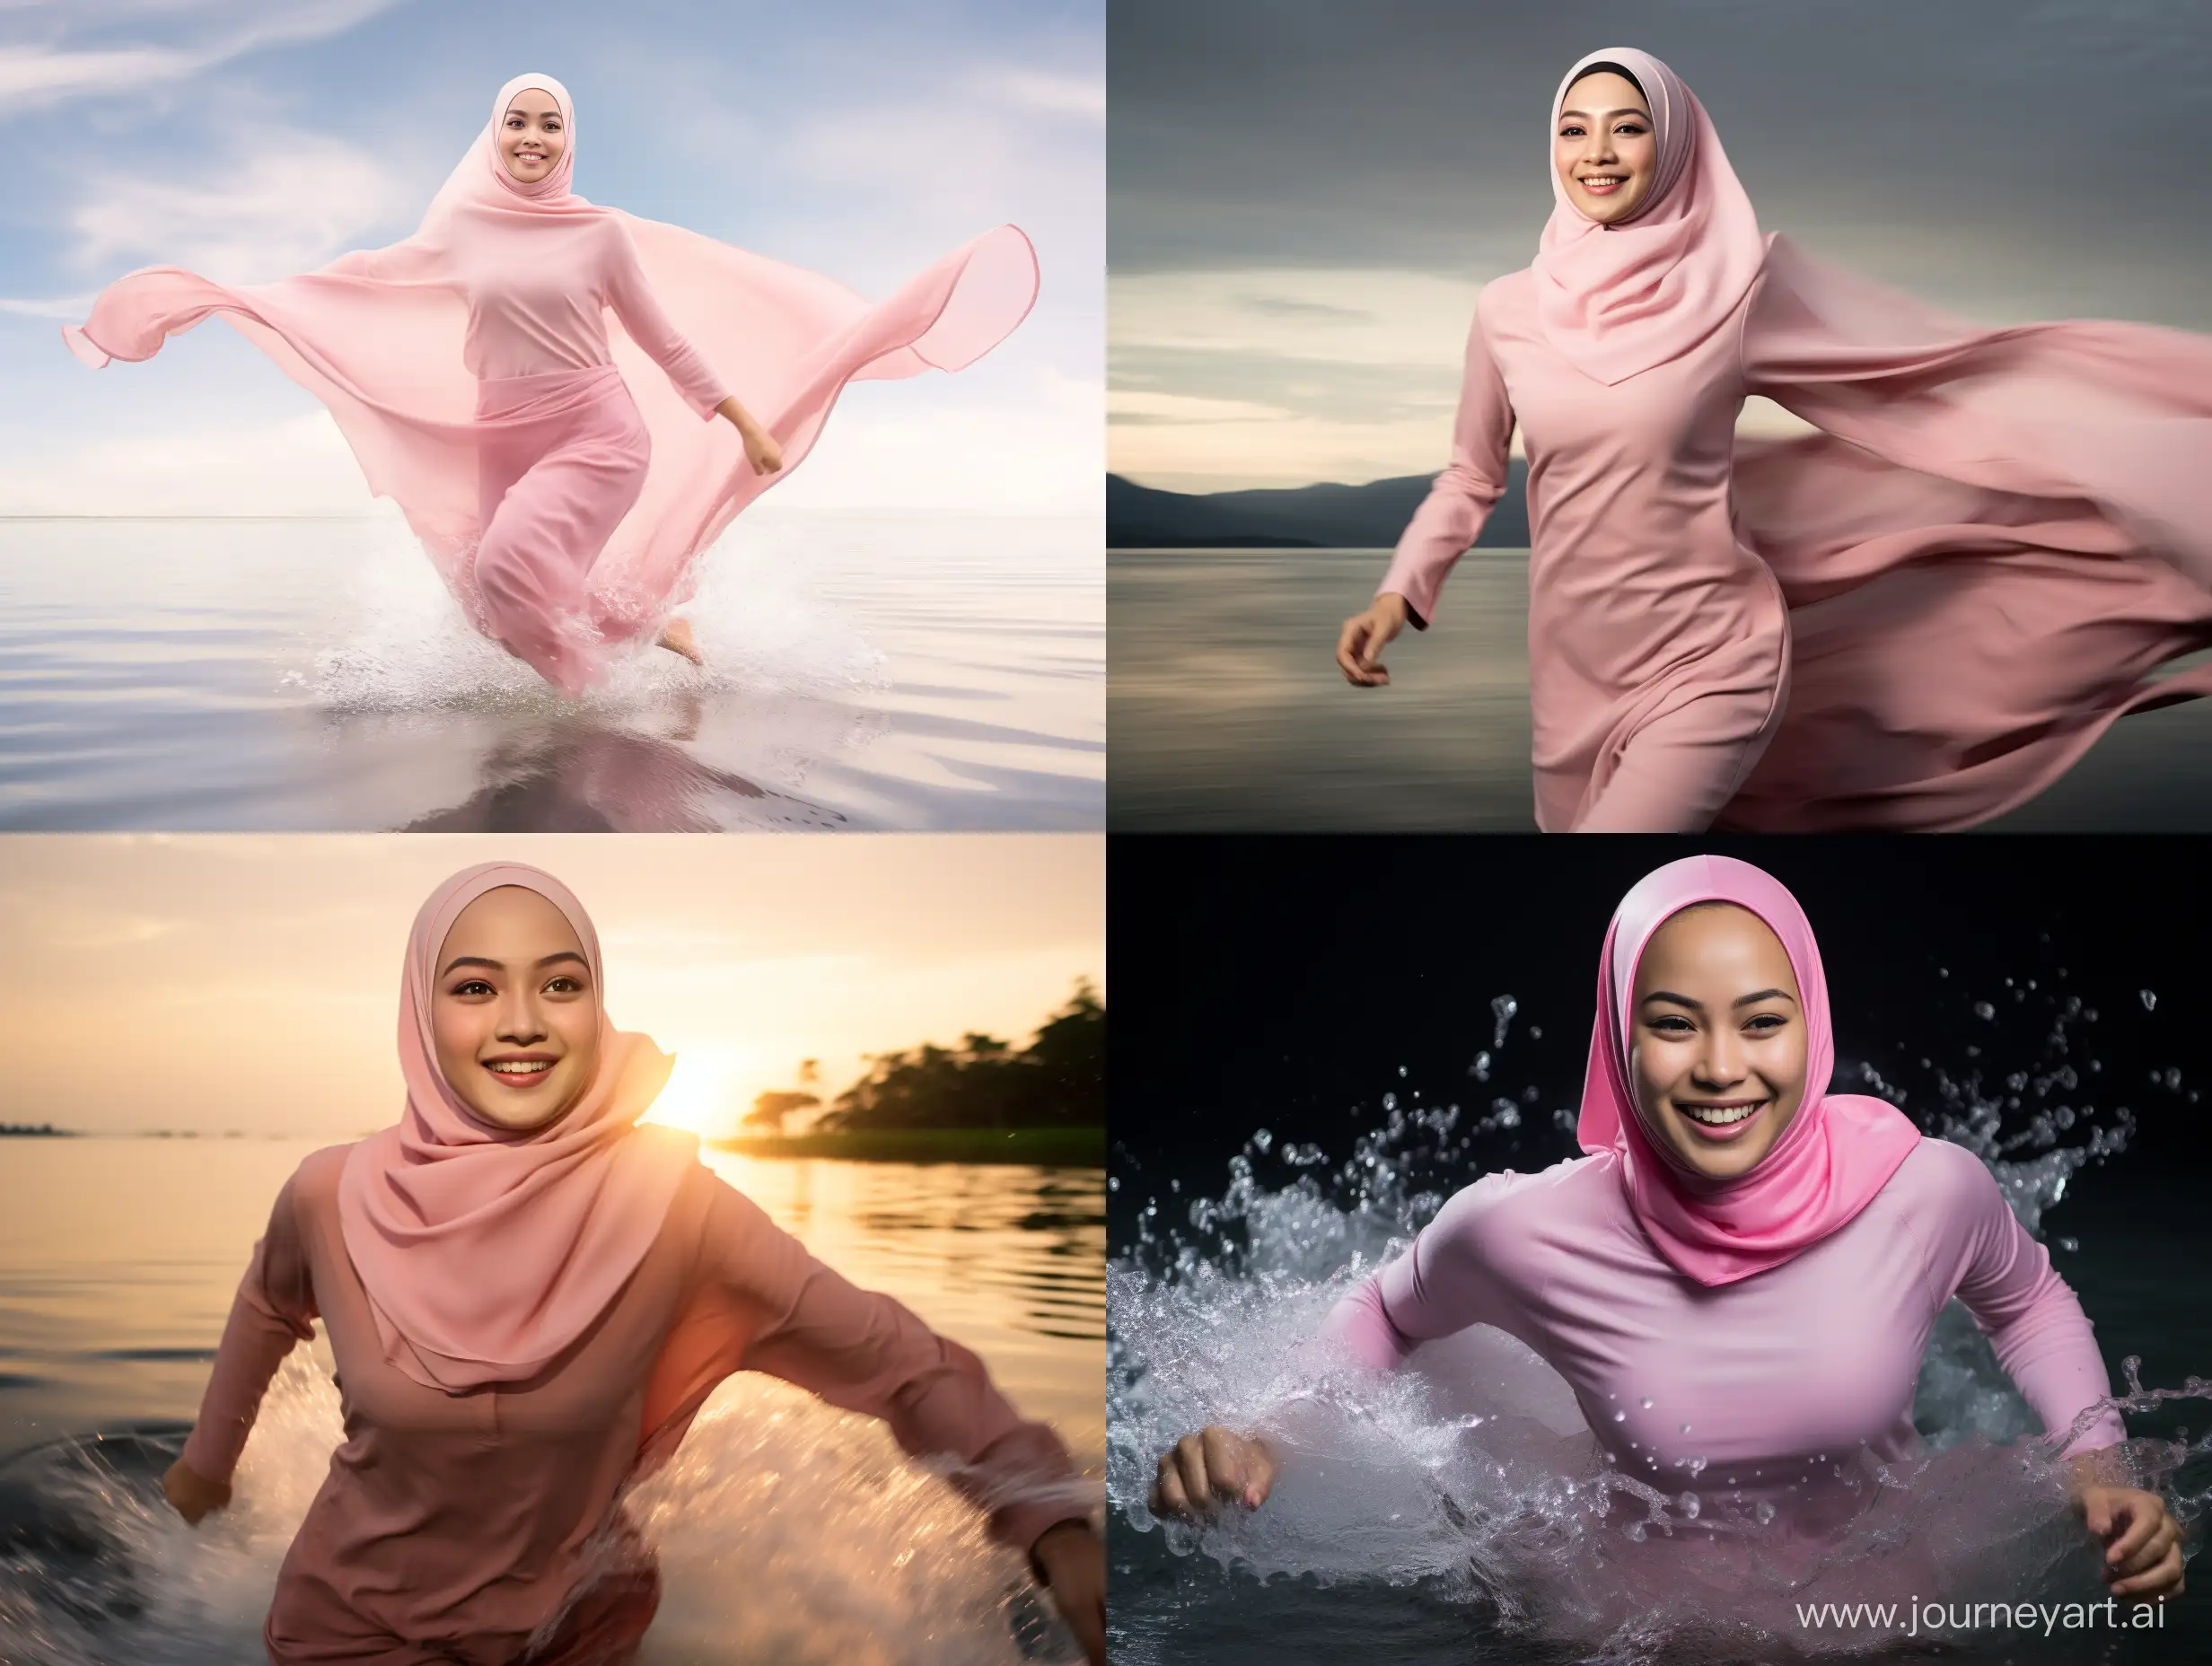 Hyperrealistic-Indonesian-Muslim-Woman-Running-on-Water-with-FlashLike-Speed-and-LED-Armor